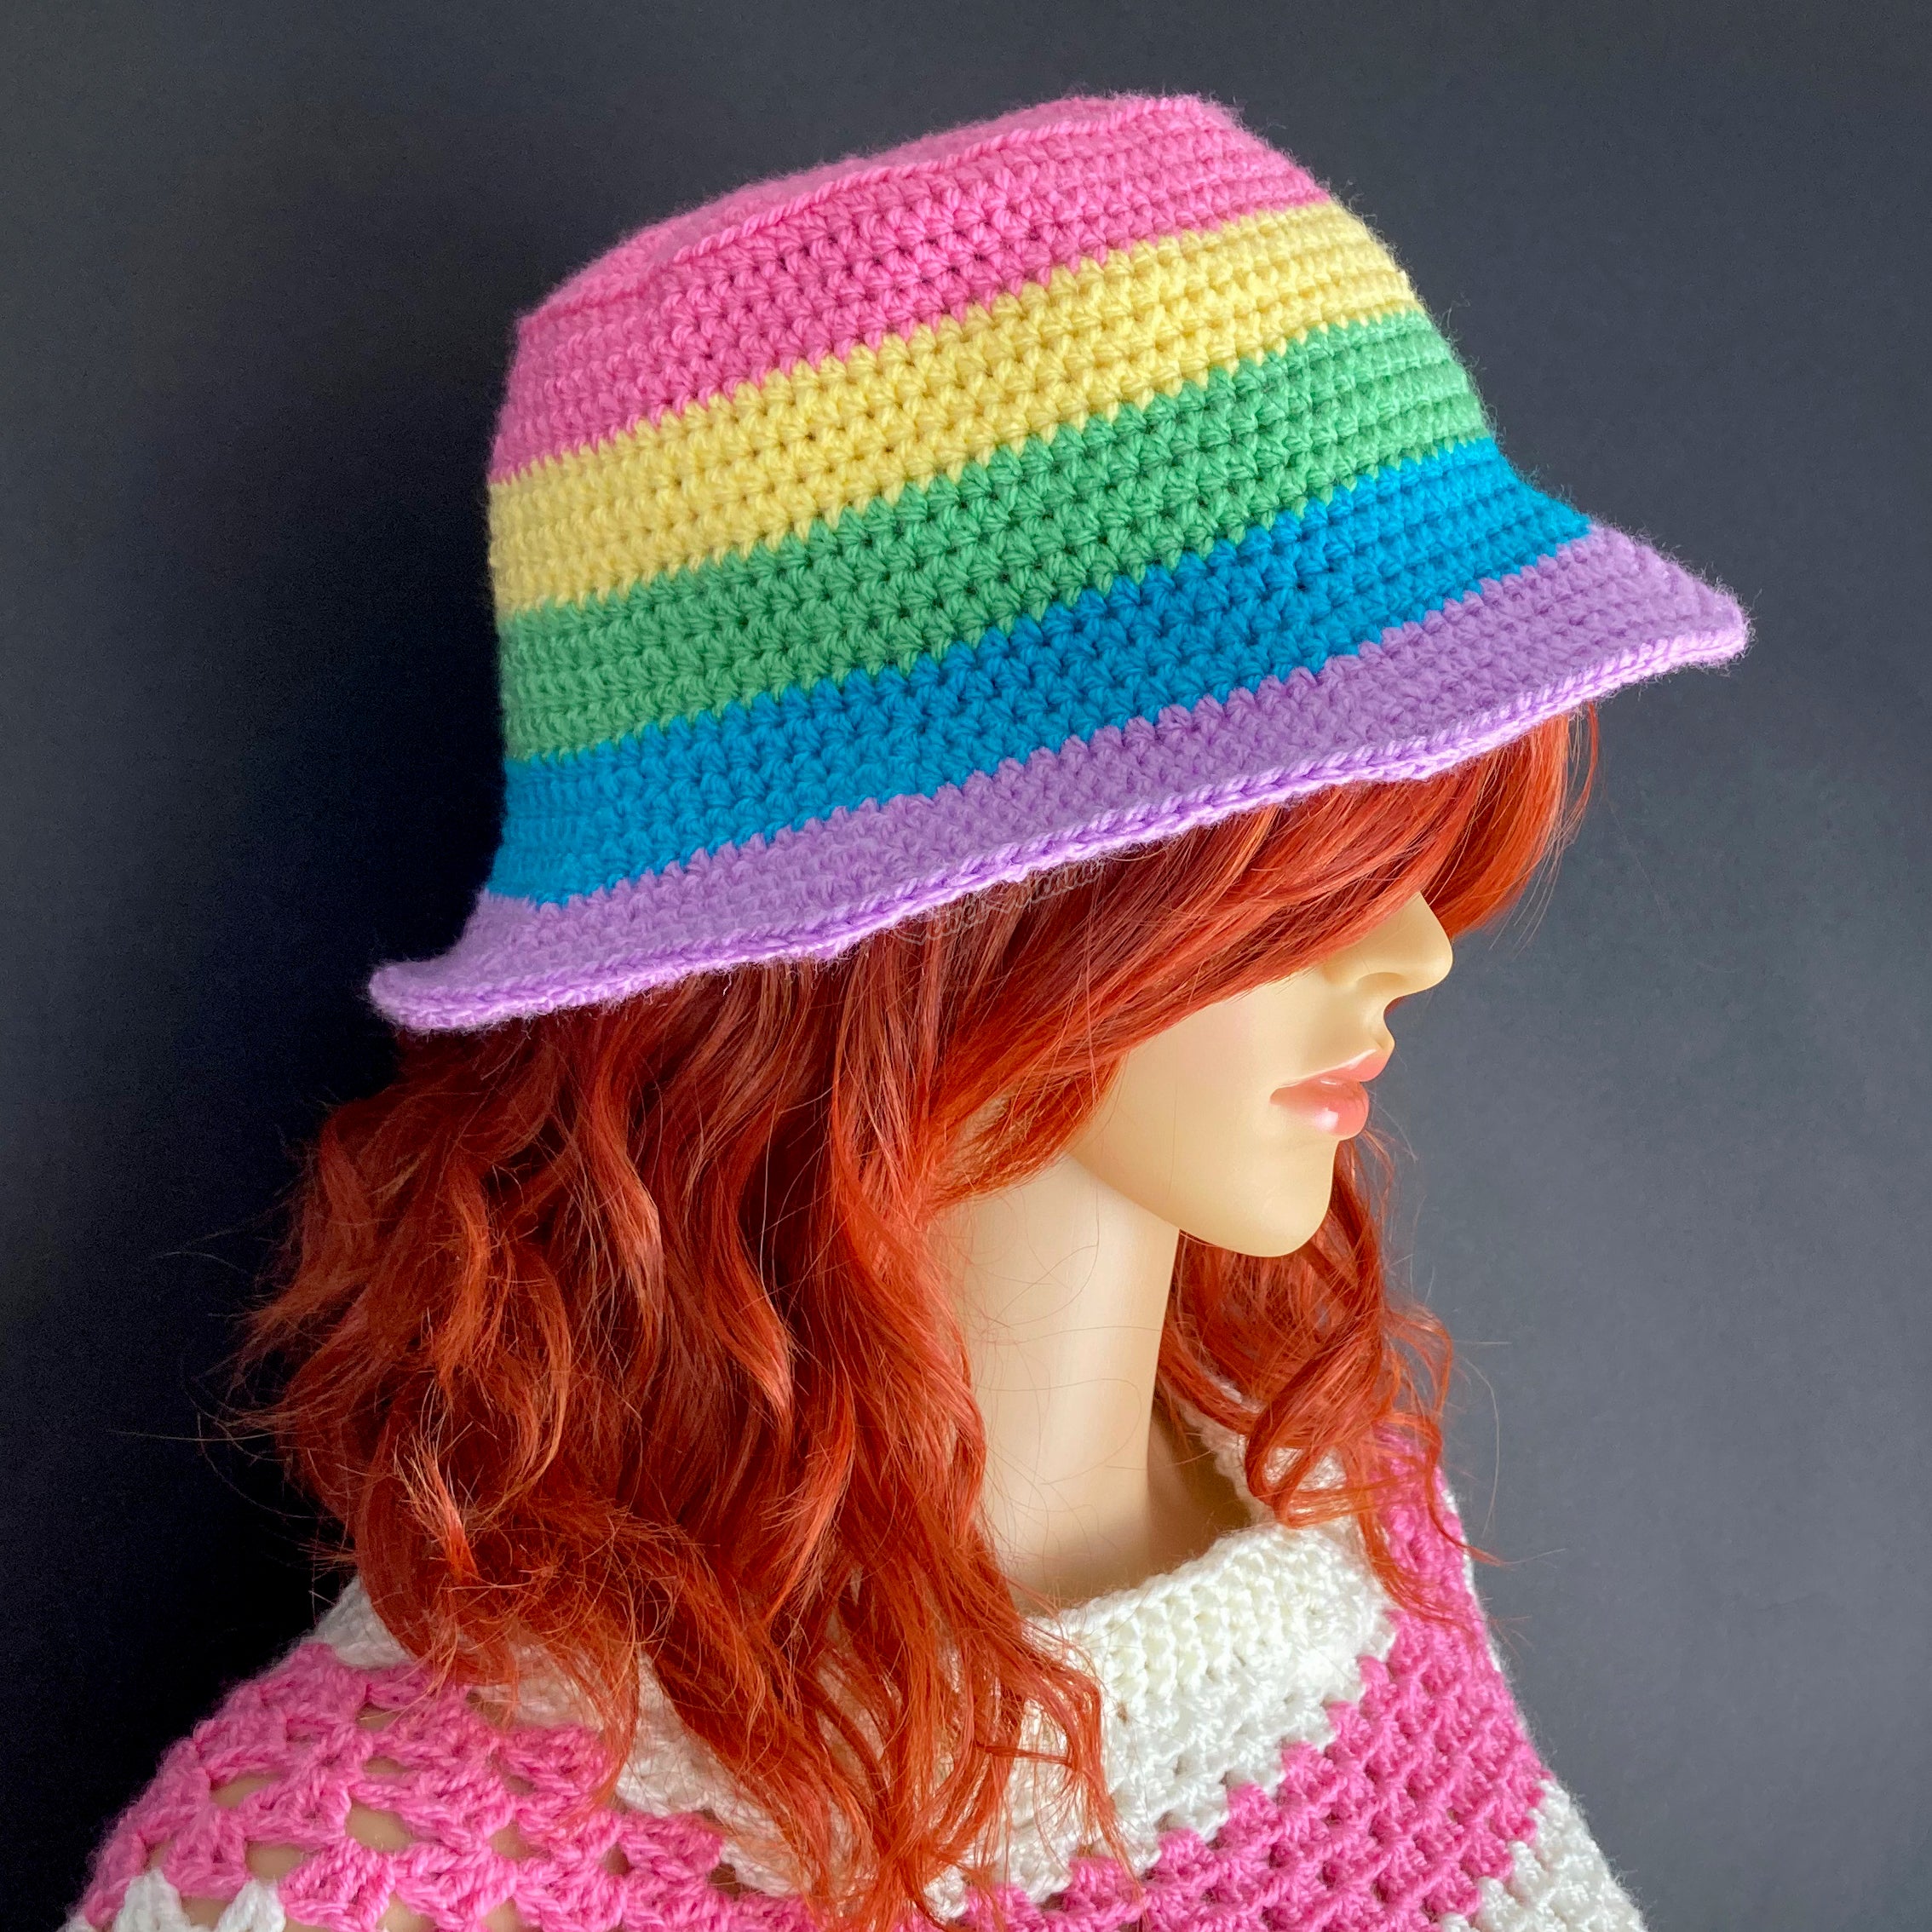 Crochet Hat with Multicolored Stripes, Trendy Summer Fashion Beach